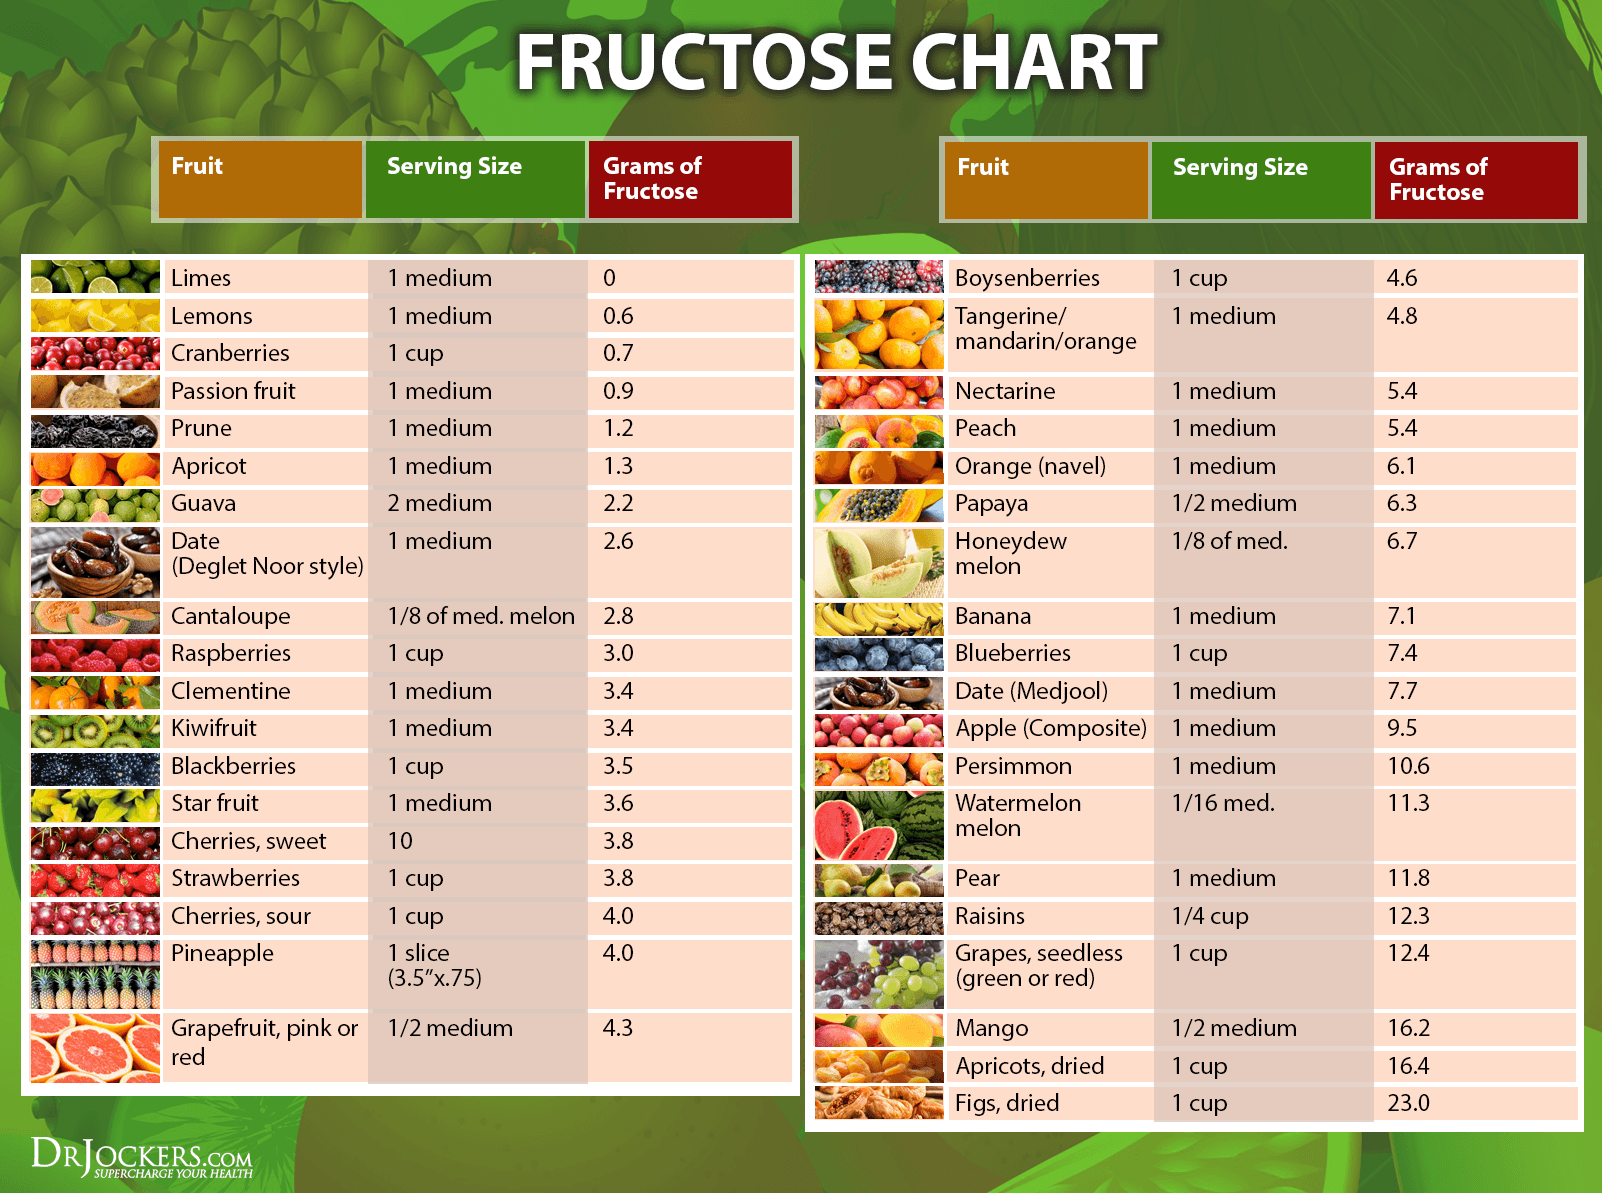 fructose, Fructose Consumption &#038; Modern Disease